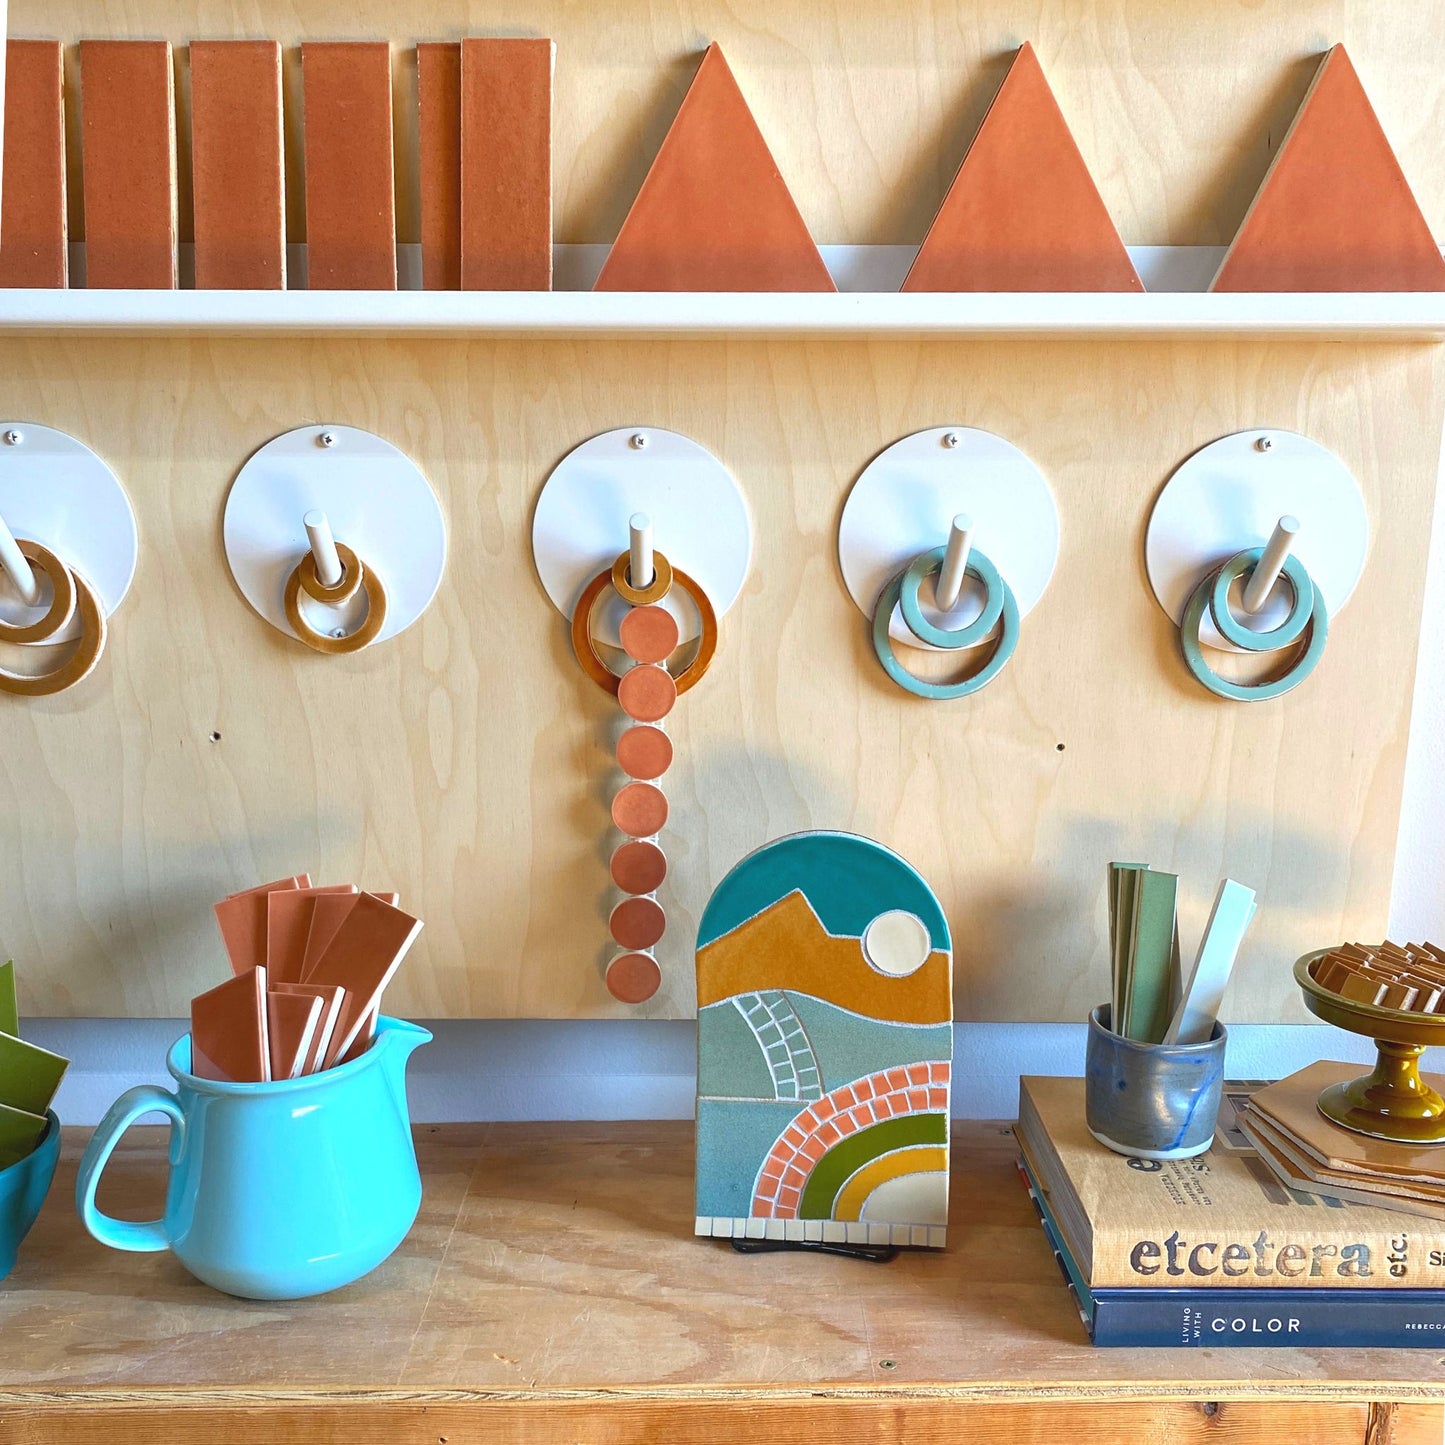 New Day Mosaic Kit in Sahara color way - assembled and styled on a bookshelf with loose tiles